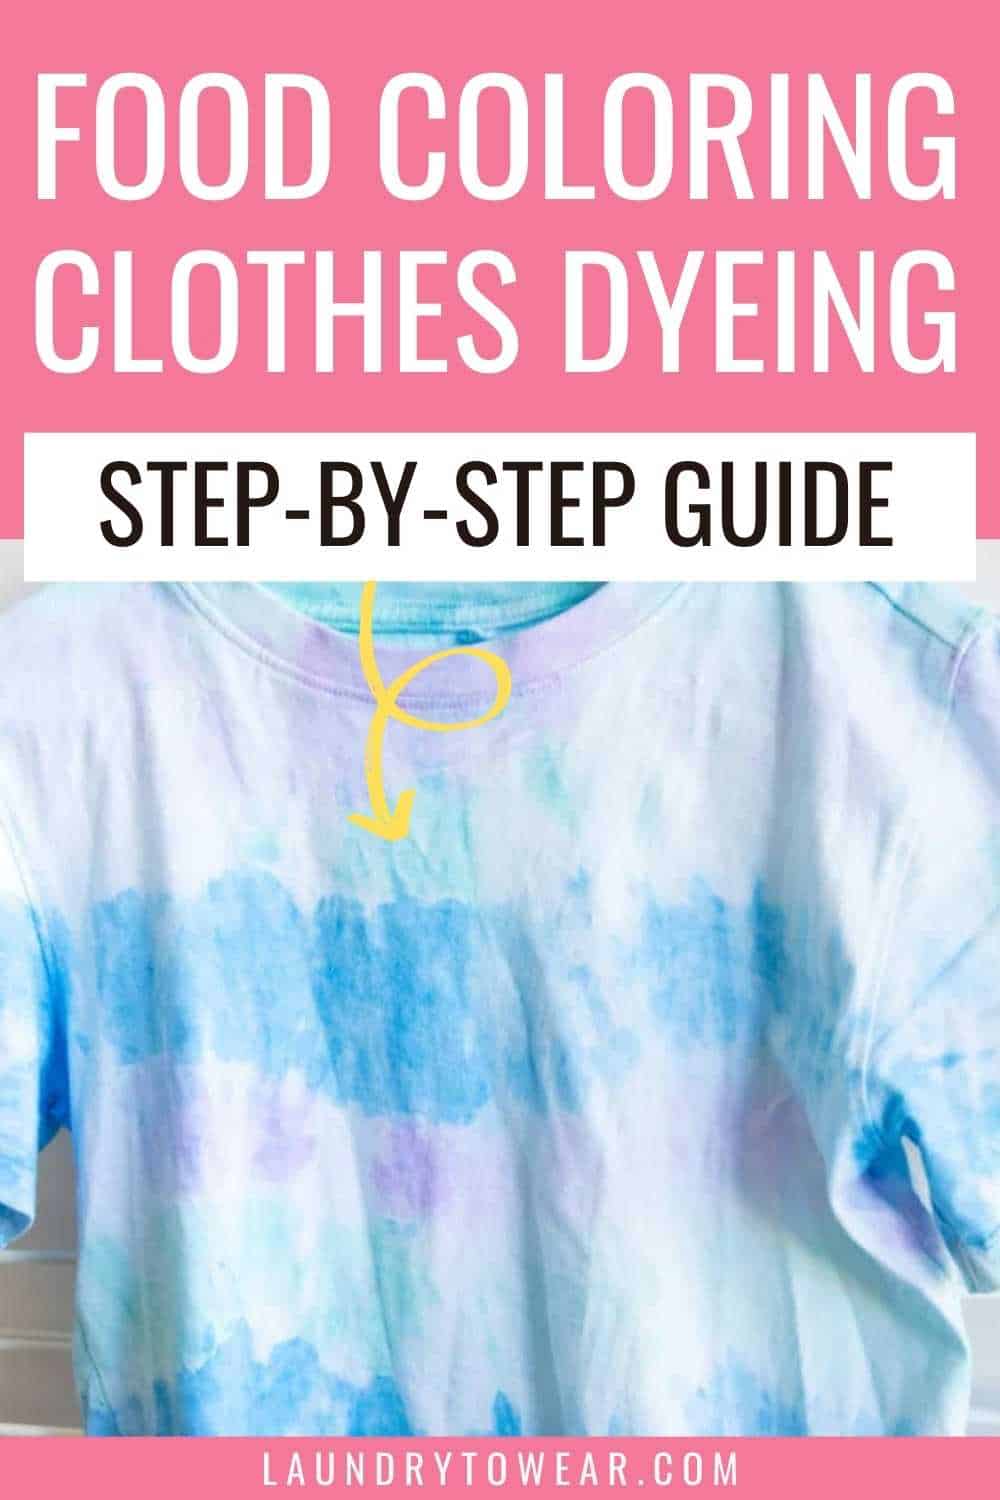 How To Dye Clothes with Food Coloring? (Step-by-Step Guide)